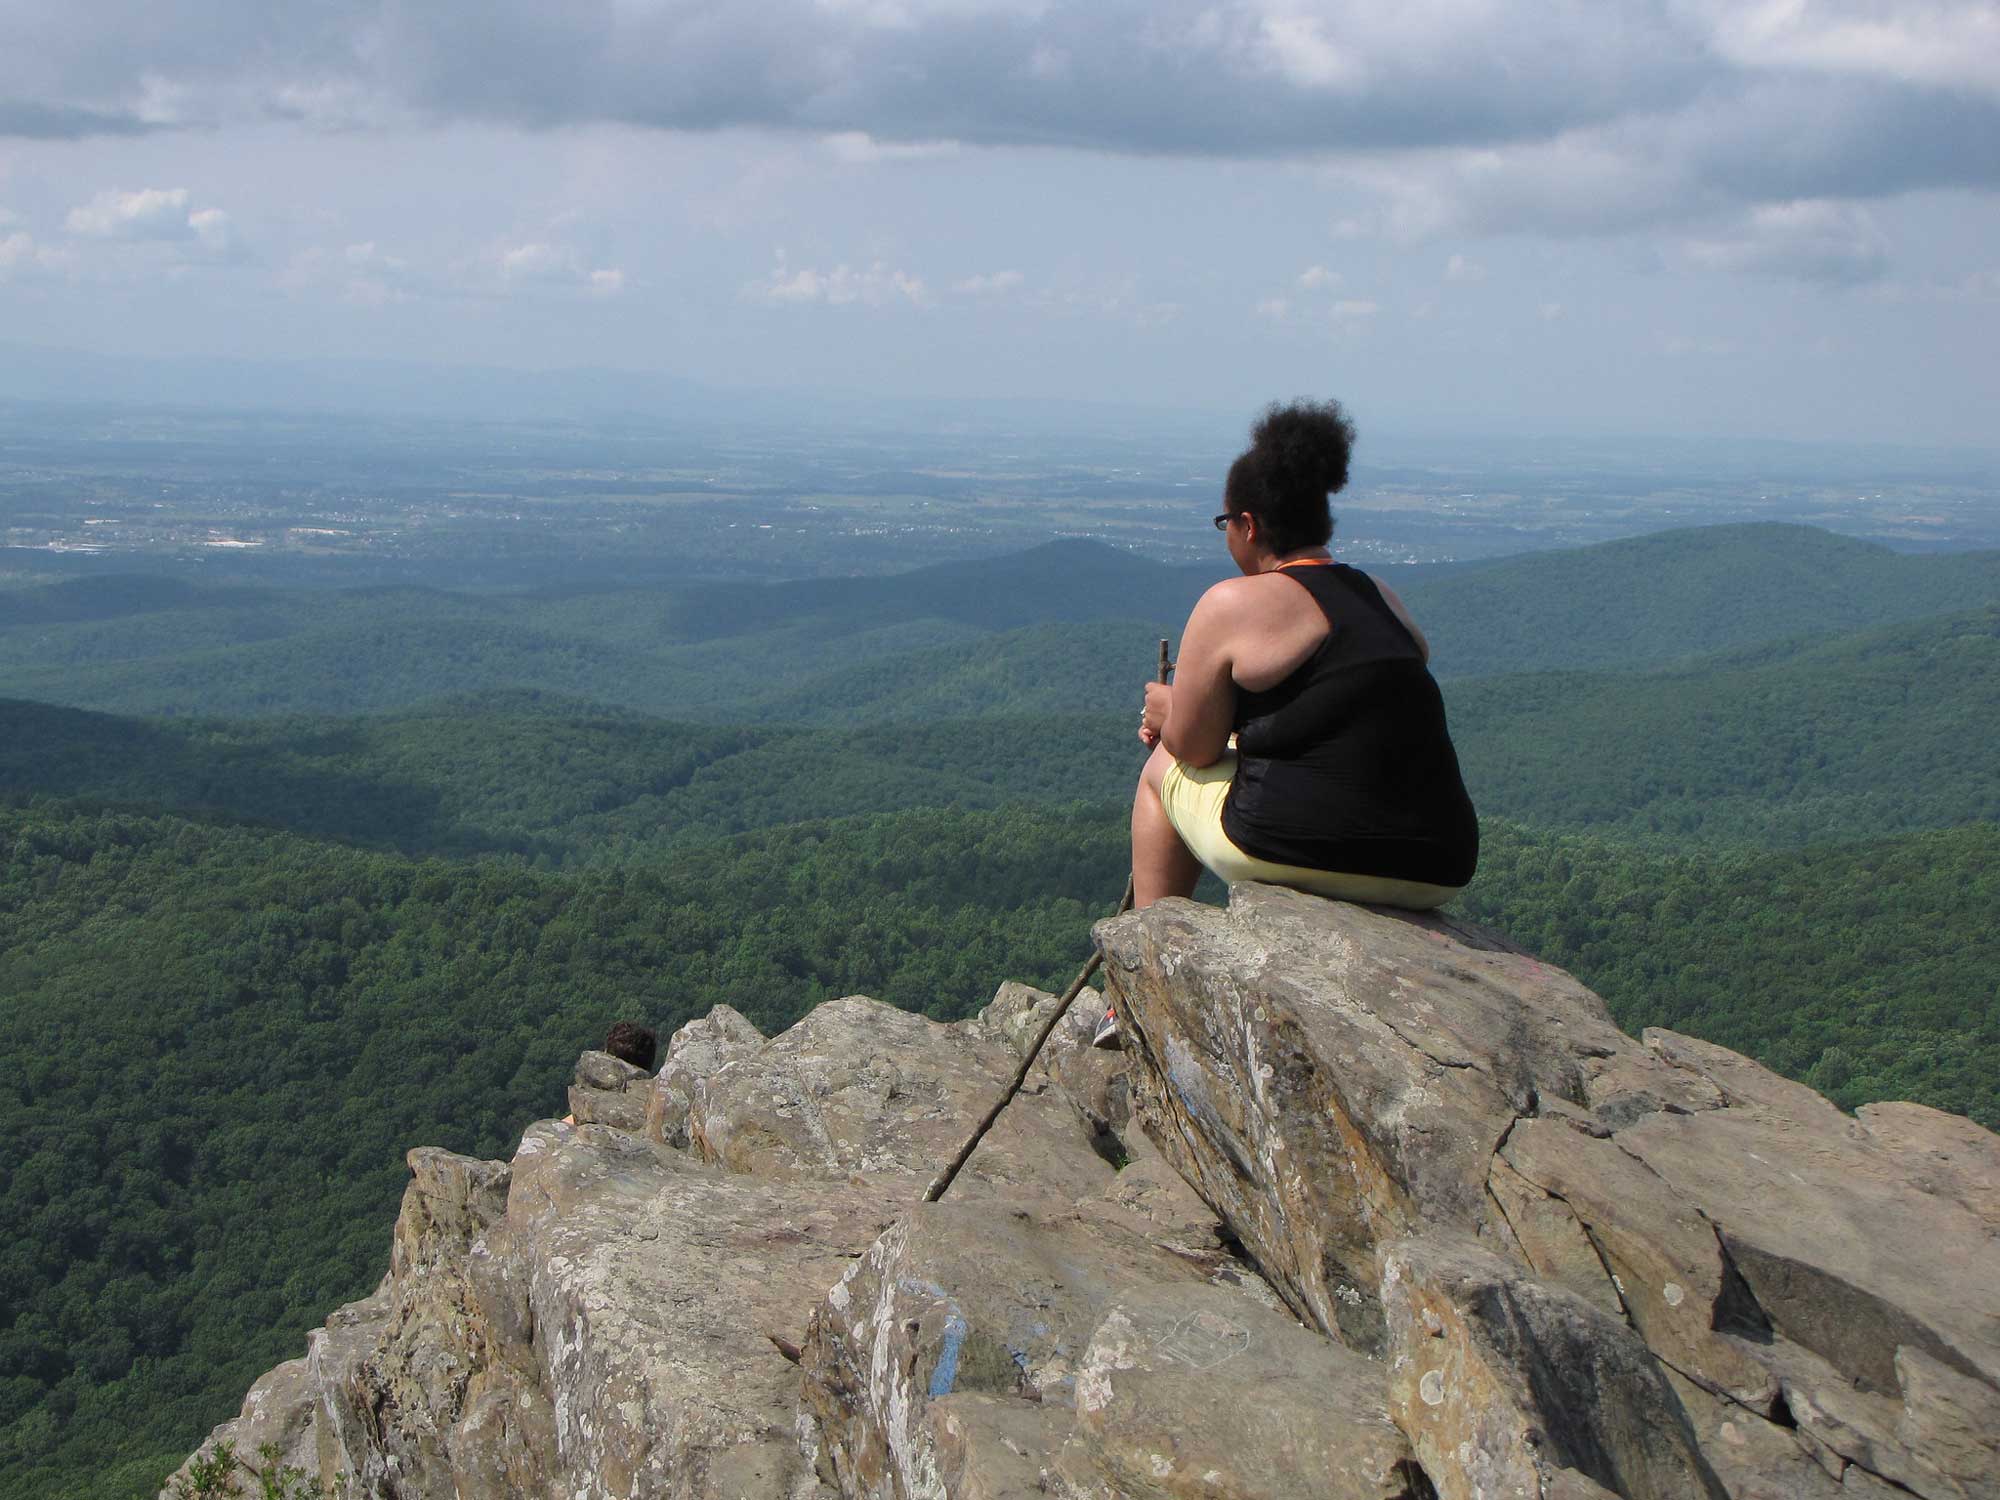 Photograph of a woman sitting on Humpback Rock, overlooking the Shenandoah Valley.